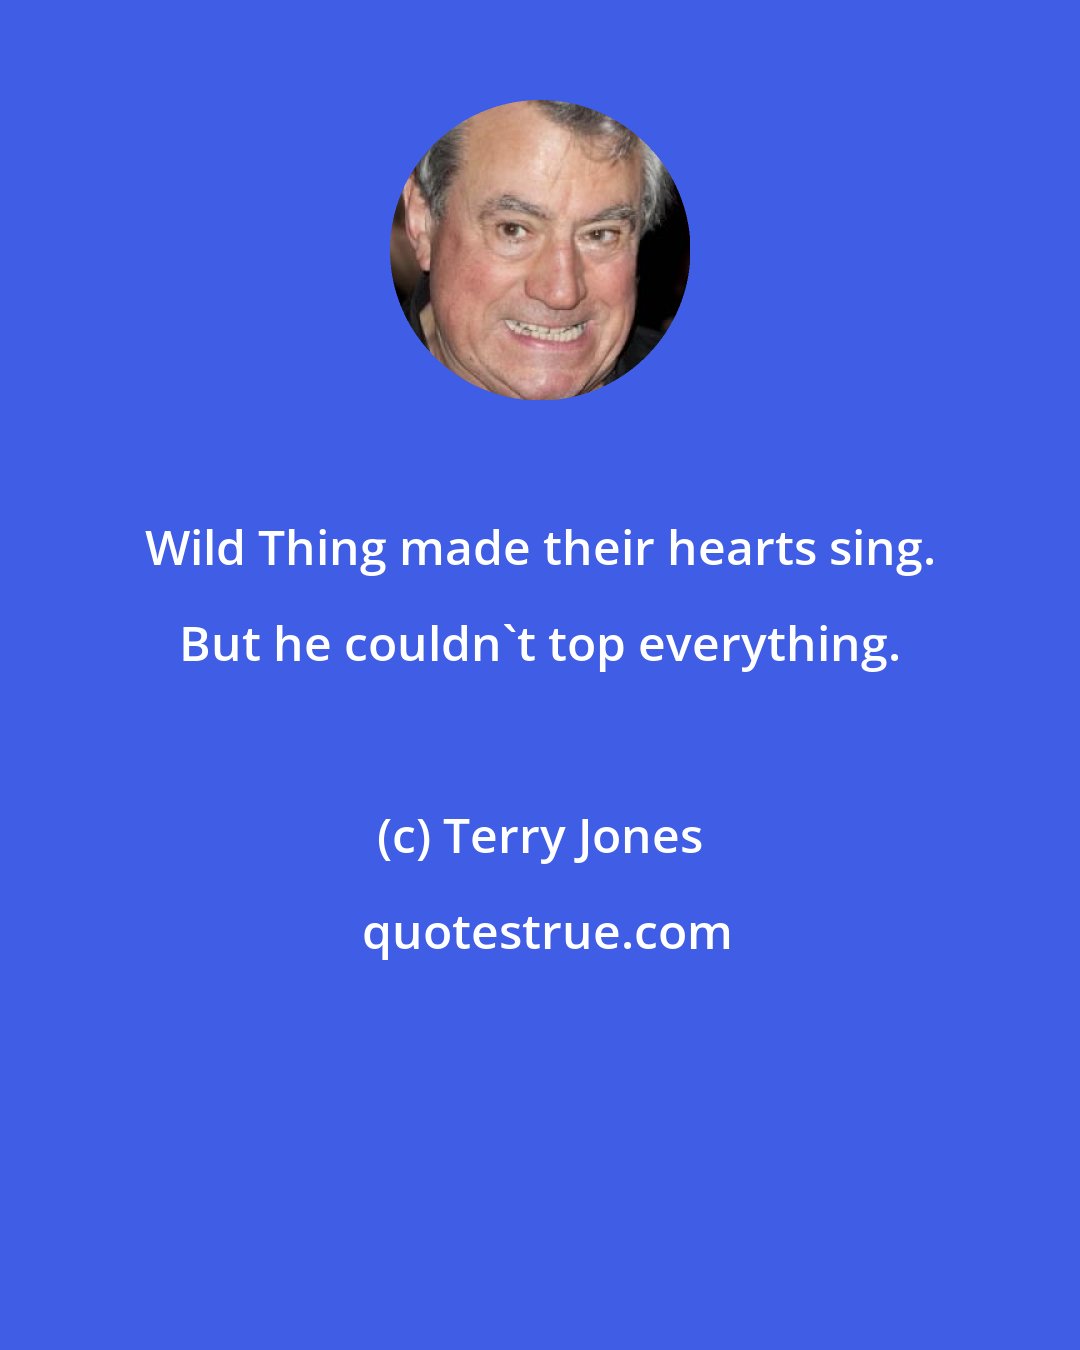 Terry Jones: Wild Thing made their hearts sing. But he couldn't top everything.